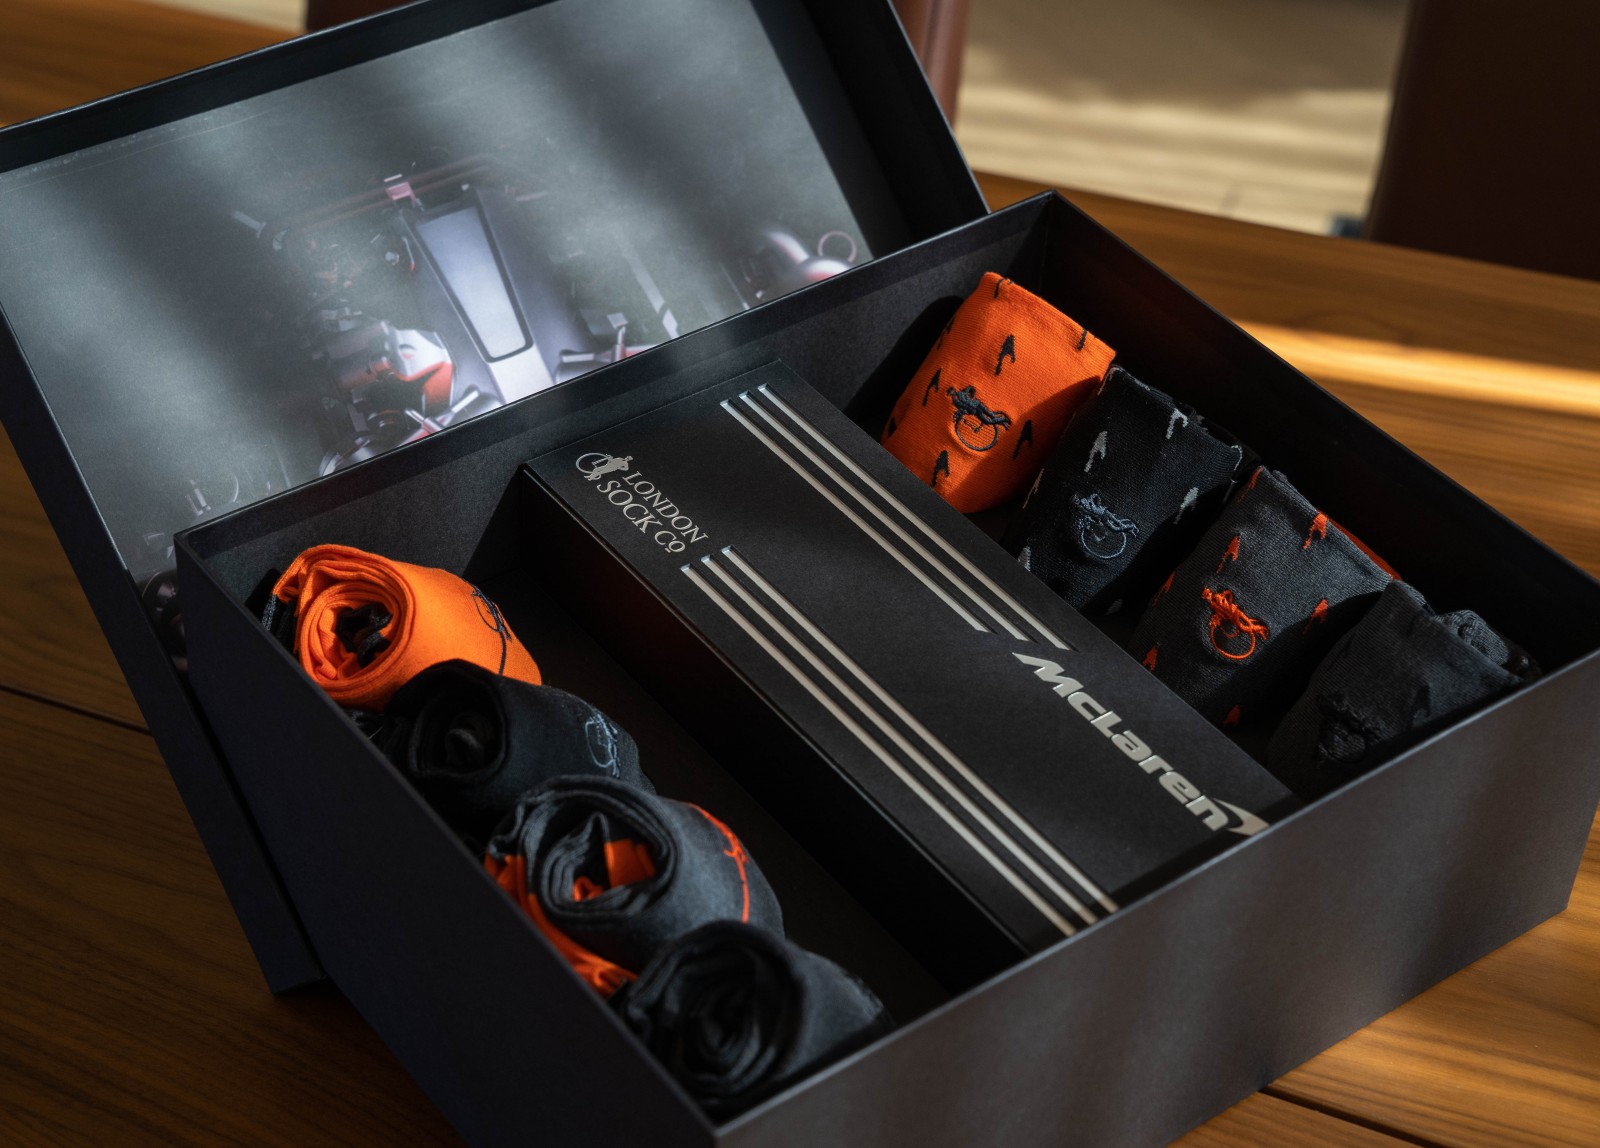 Eight socks in a box with Mclaren logos and orange colours